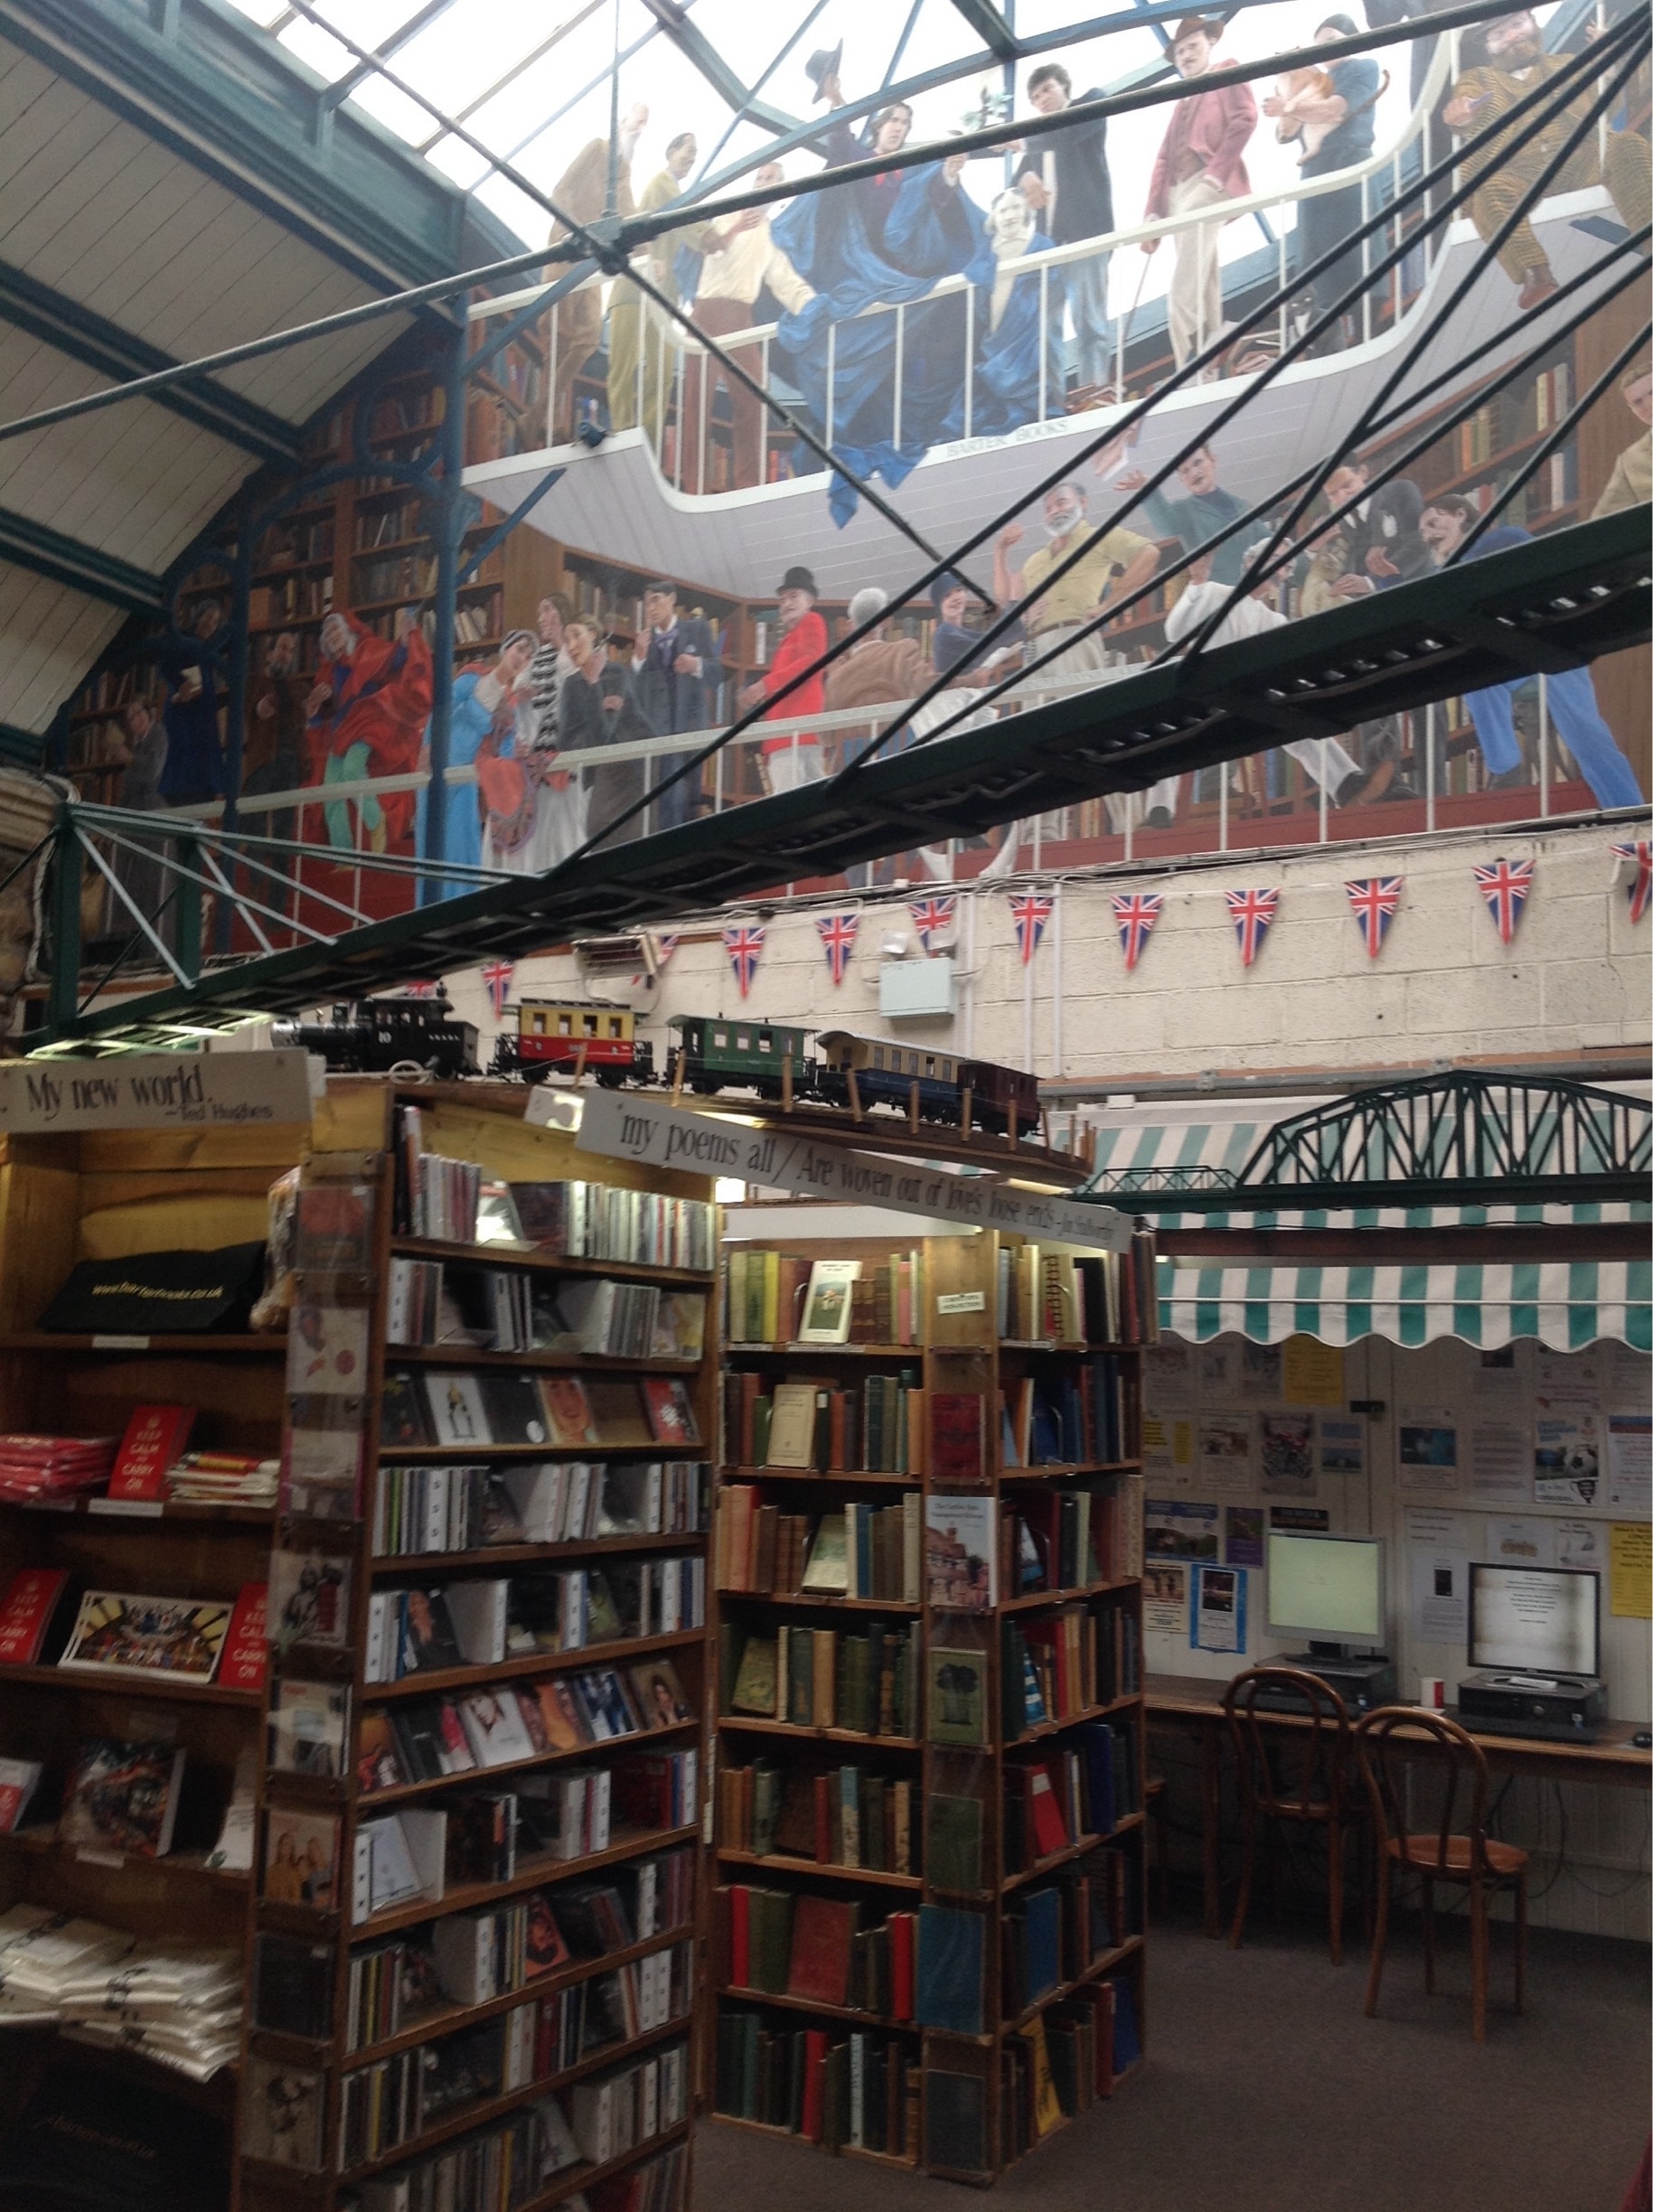 Fabulous second hand bookshop in an old railway station. The waiting room is a superb cafe. There's a log fire and miniature train set running round the top of the bookshelves.